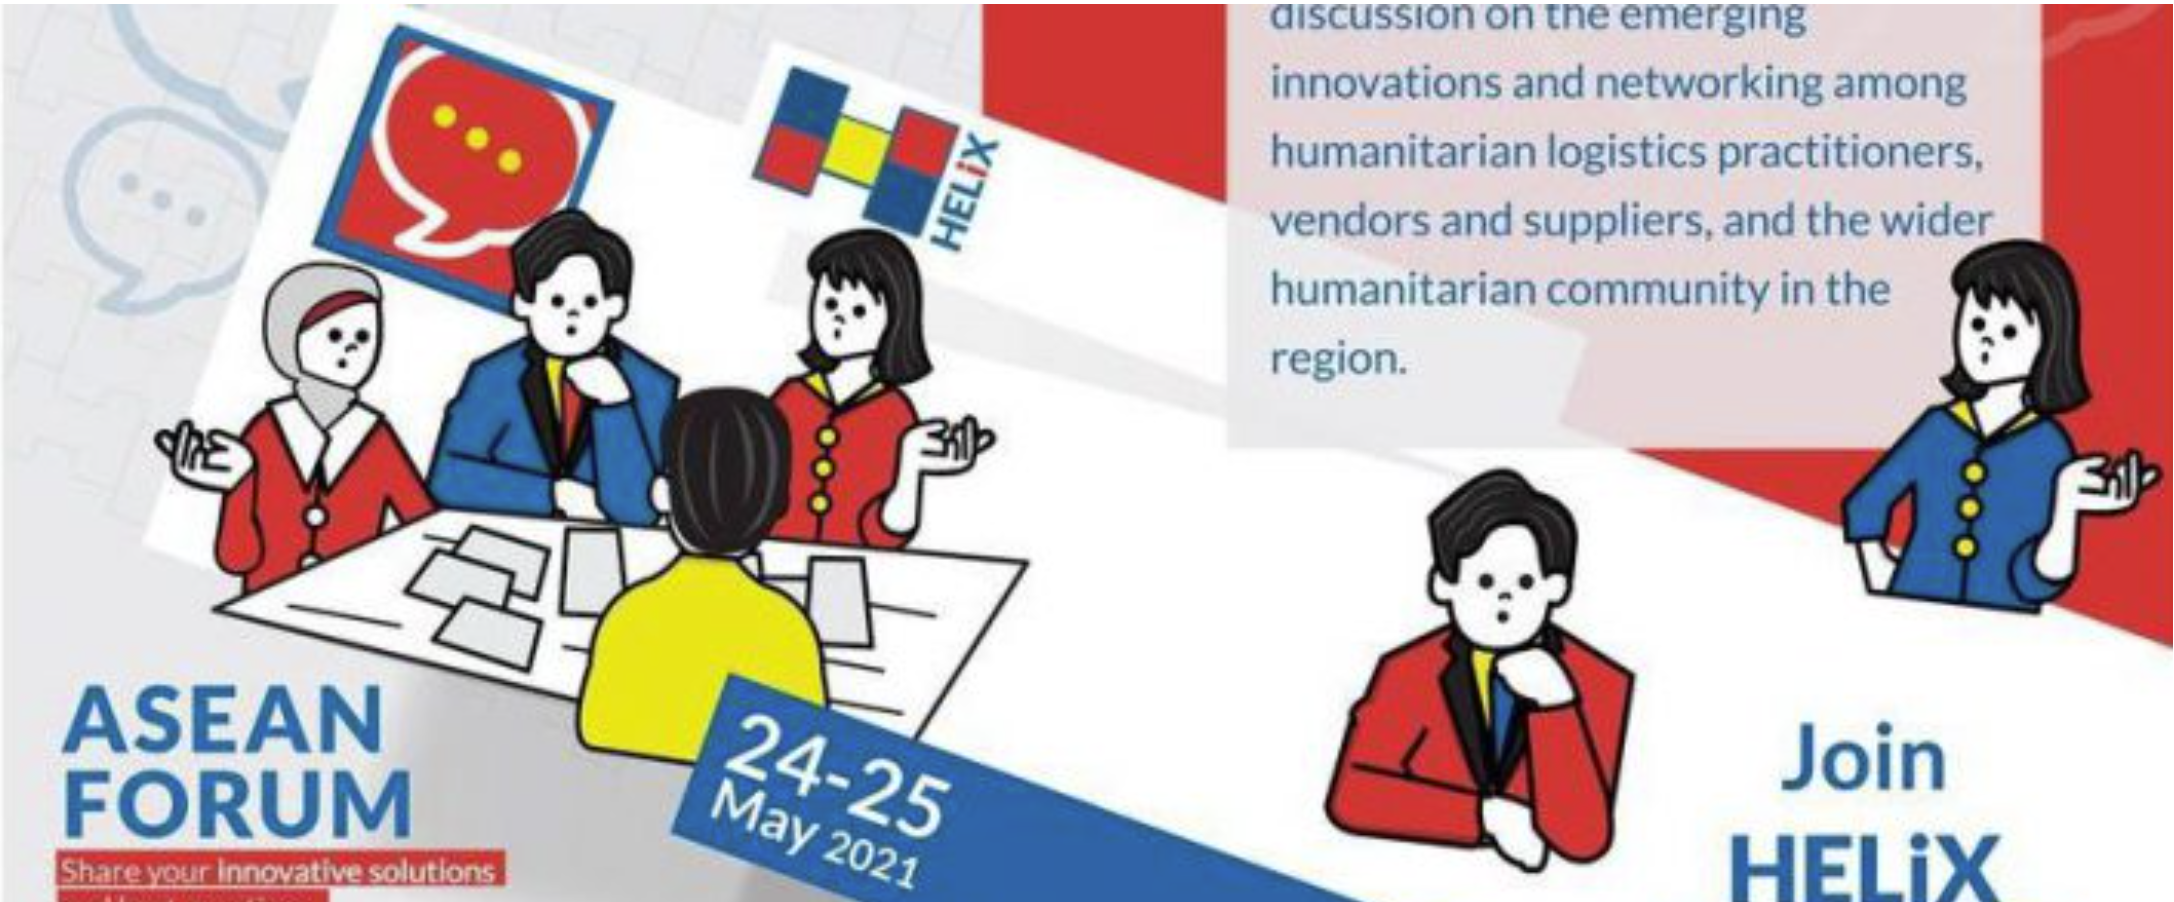 [SUPPORT MEDIA] - [24/05/2021] Invitation To Join ASEAN Forum On International Exhibition, Humanitarian & Emergency Logistics Innovation Expo (HELIX) 2021